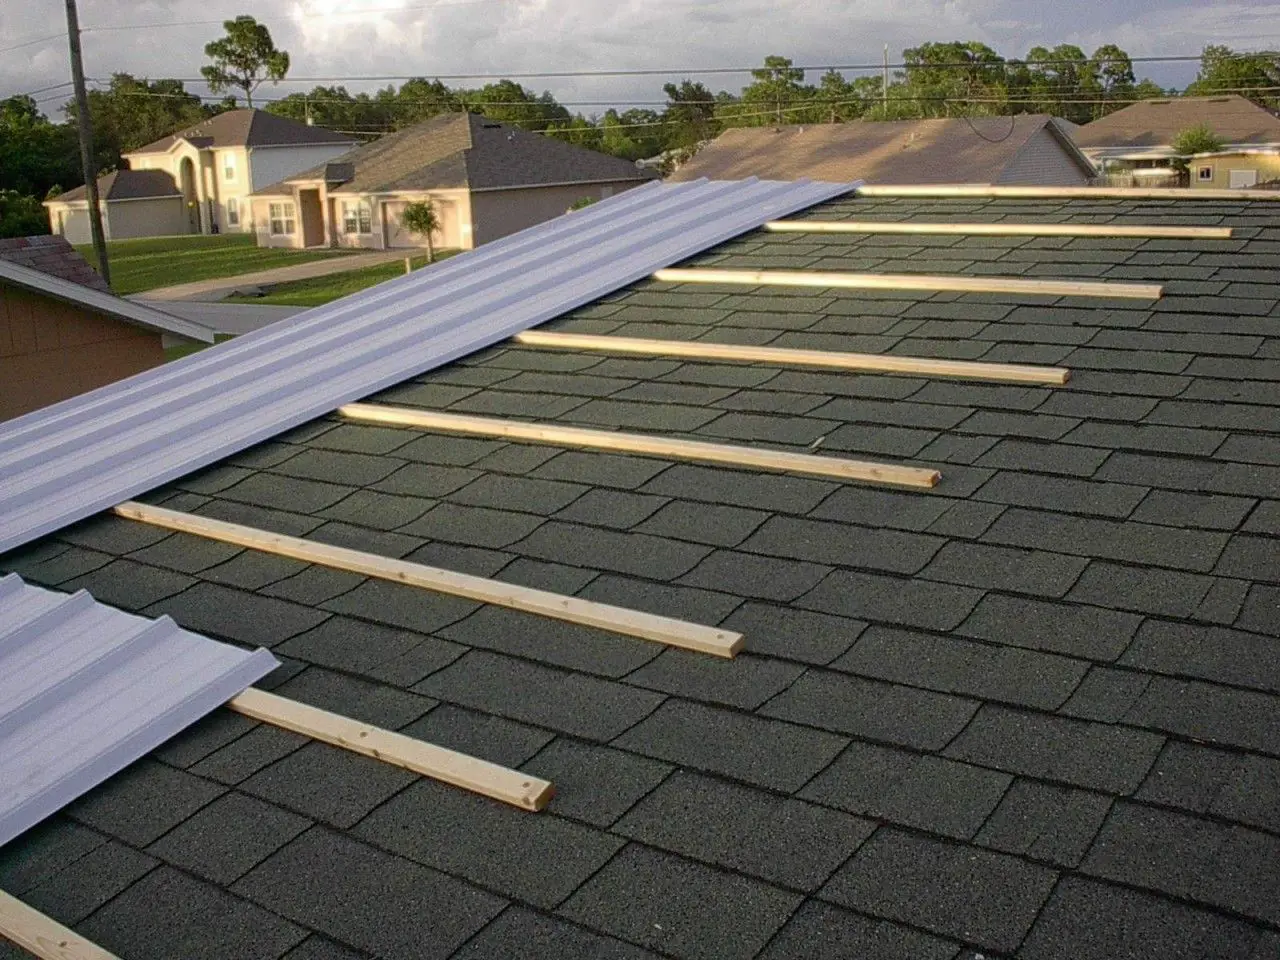 How to Install Metal Roofing Over Shingles